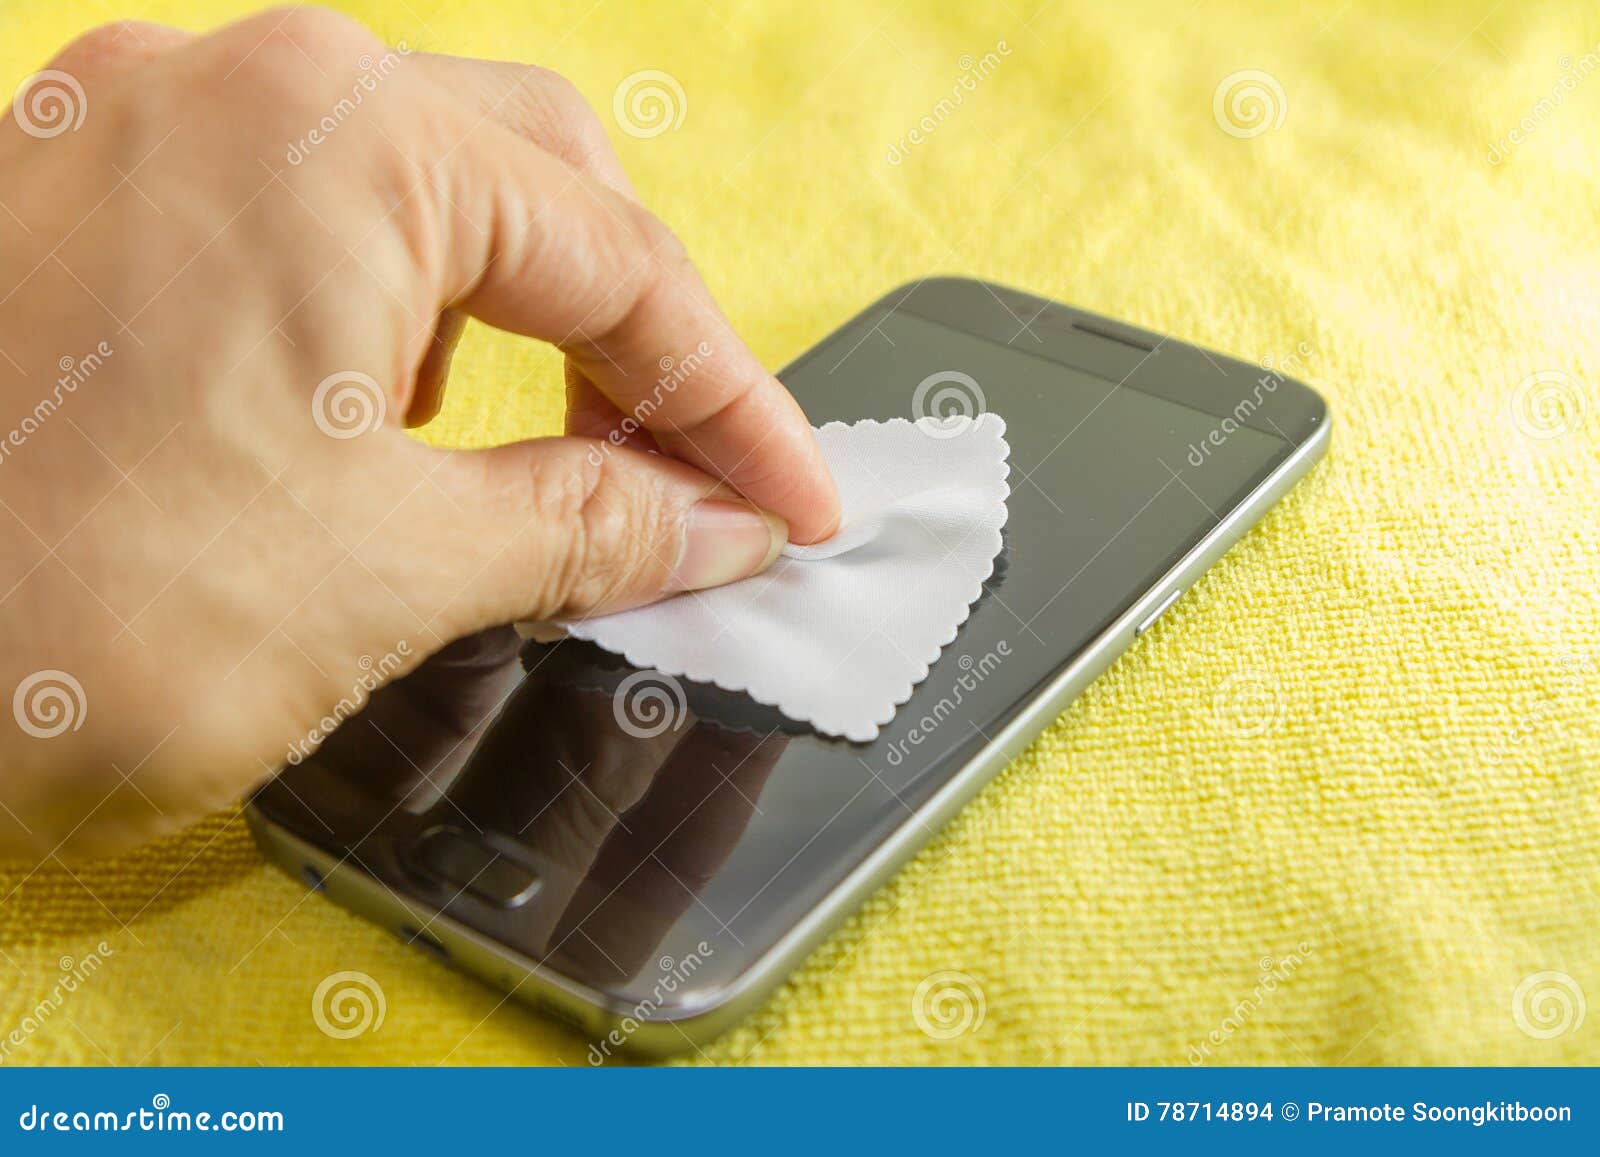 Cleaning Mobile Phone Screen by Microfiber Cloth. Stock Photo